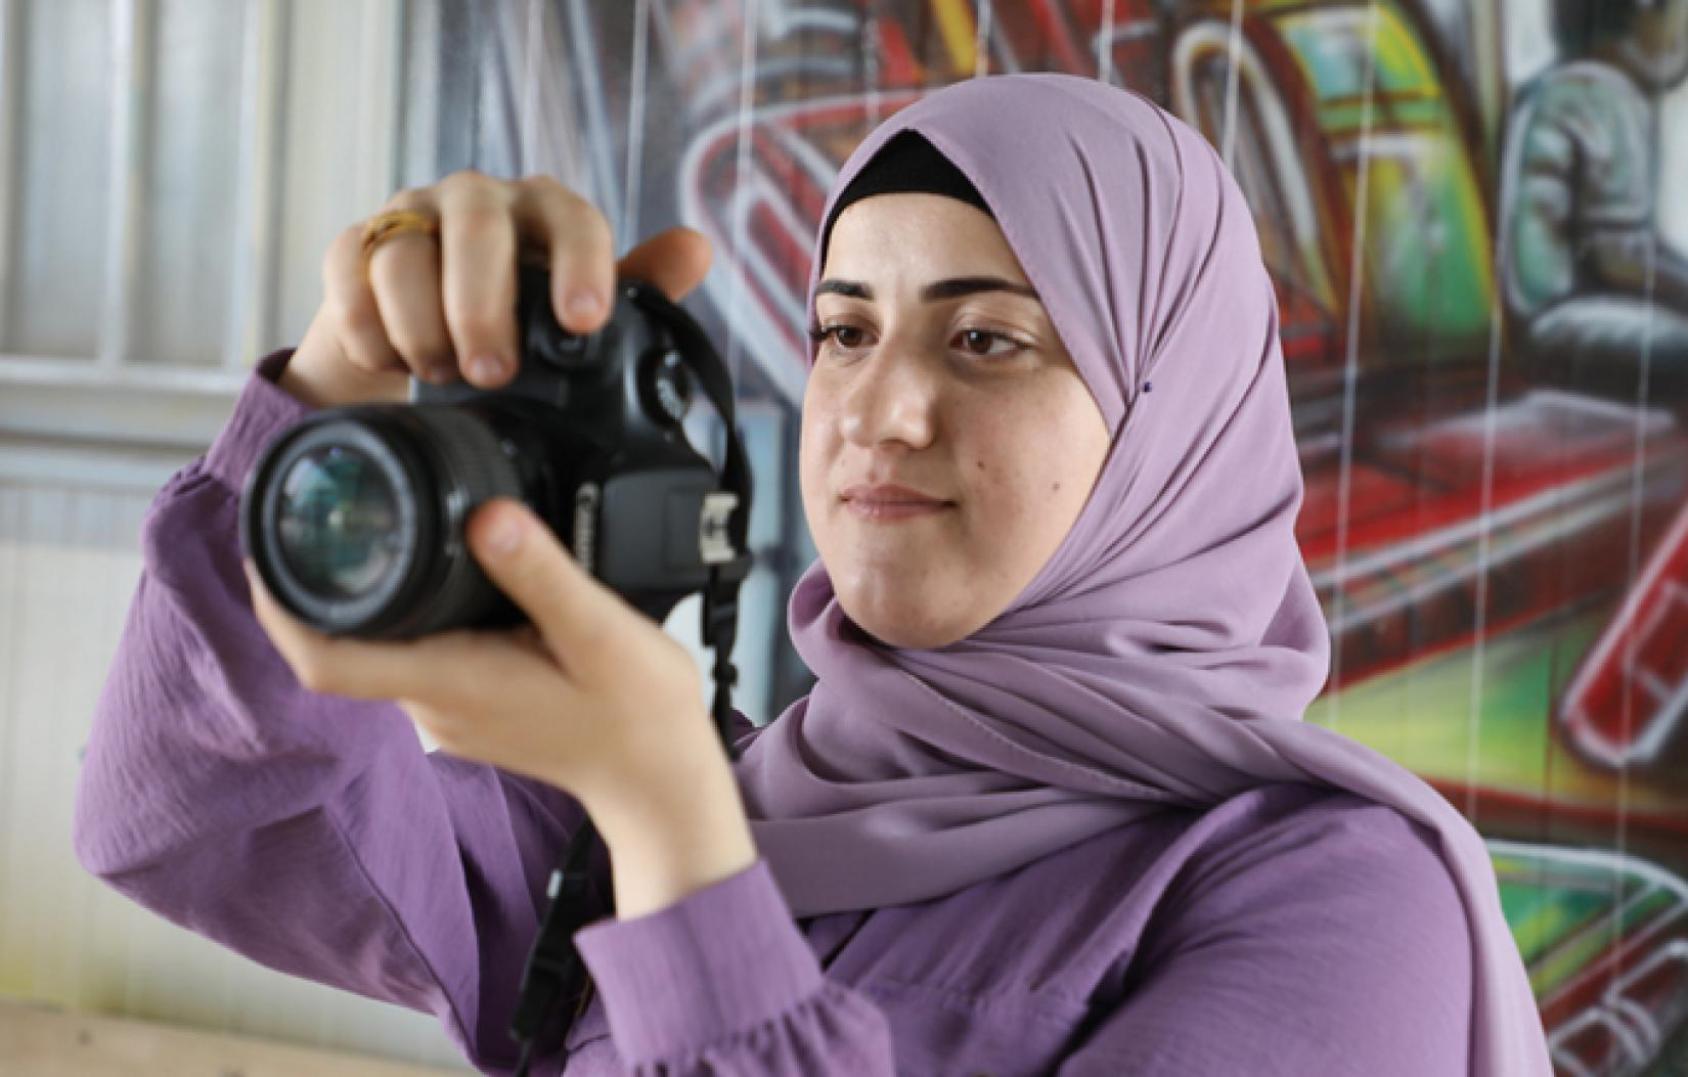 A woman in a lilac dress and headscarf looks through a camera as she takes a picture.